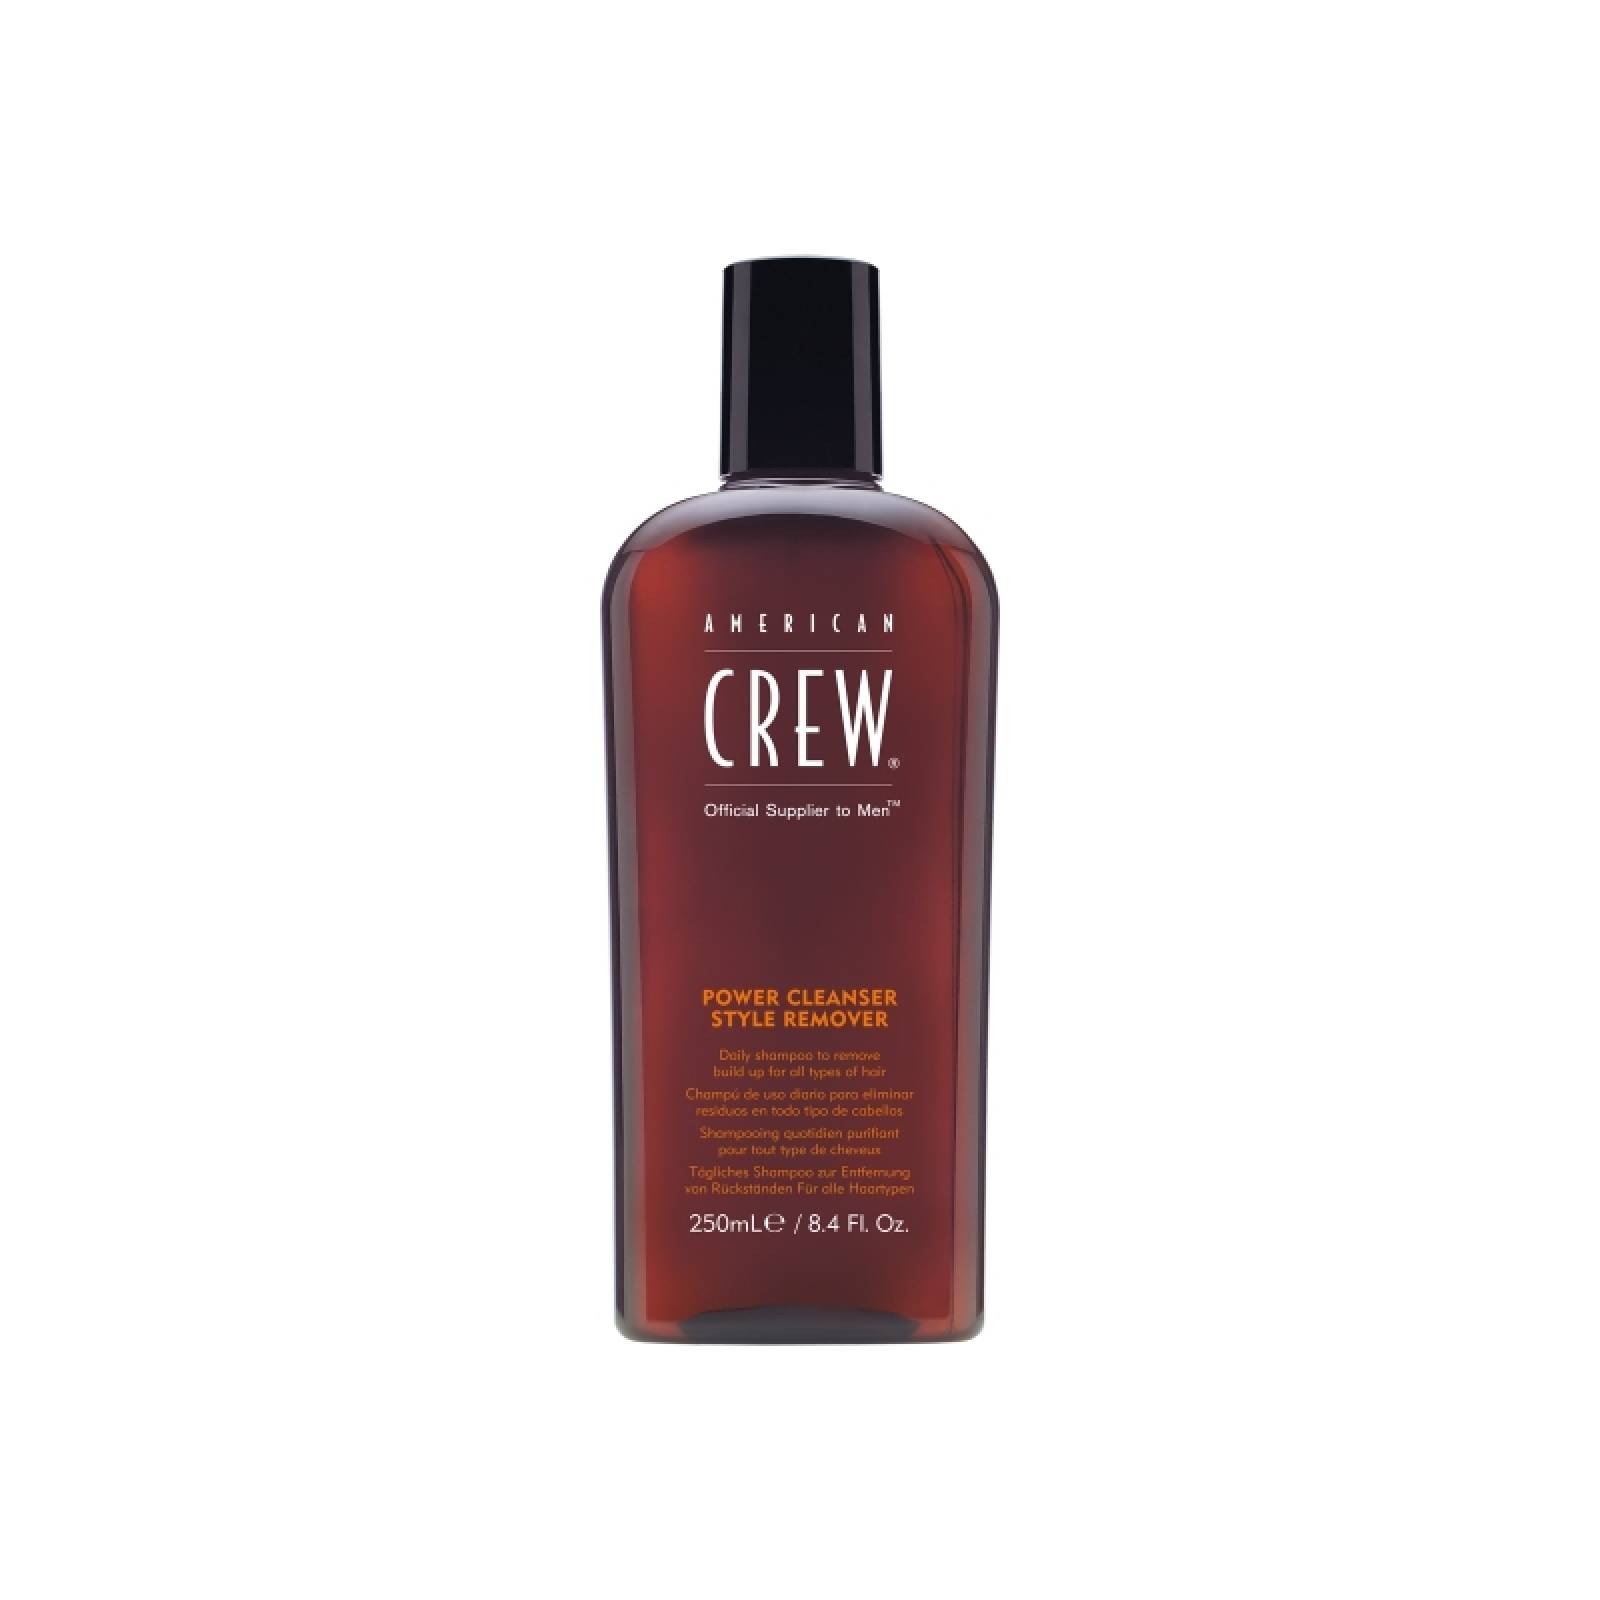 American Crew Shampoo Power Cleanser Style Remover 250 ml